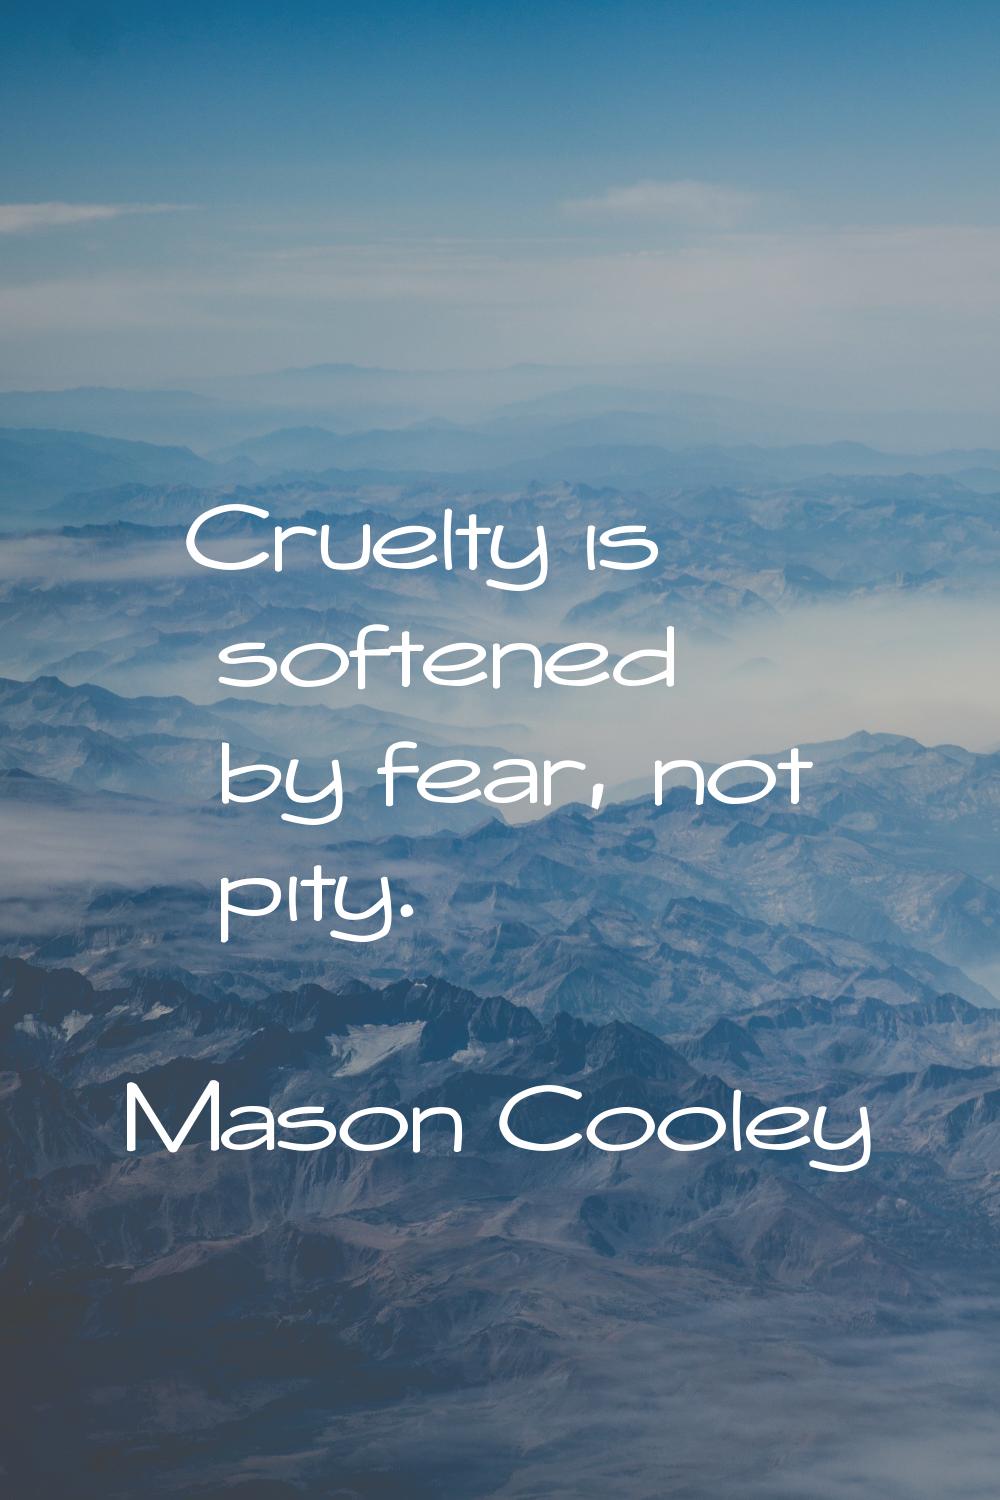 Cruelty is softened by fear, not pity.